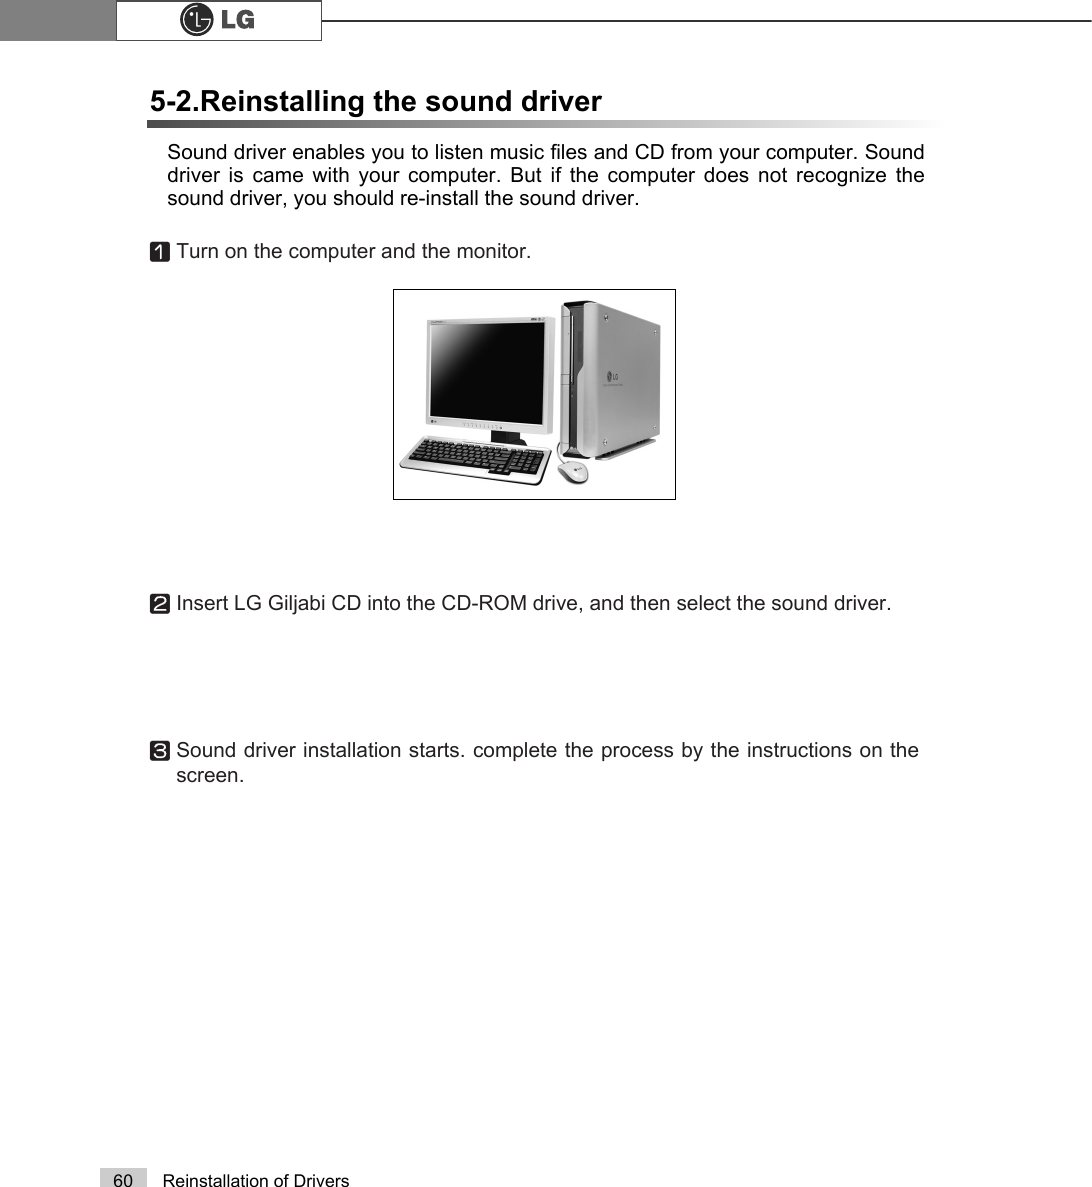 60 Reinstallation of DriversSound driver enables you to listen music files and CD from your computer. Sounddriver is came with your computer. But if the computer does not recognize thesound driver, you should re-install the sound driver.5-2.Reinstalling the sound driverⓞTurn on the computer and the monitor.ⓟInsert LG Giljabi CD into the CD-ROM drive, and then select the sound driver.ⓠSound driver installation starts. complete the process by the instructions on thescreen.